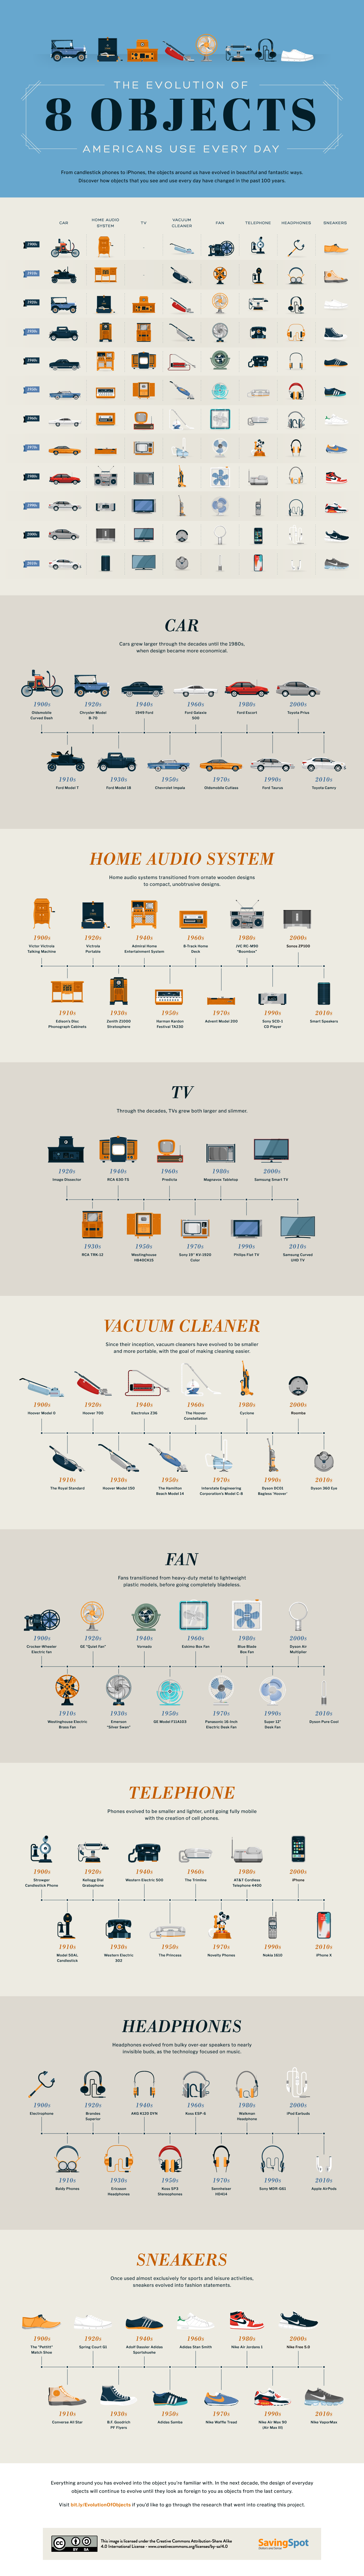 The Evolution of 8 Objects Americans Use Every Day #infographic